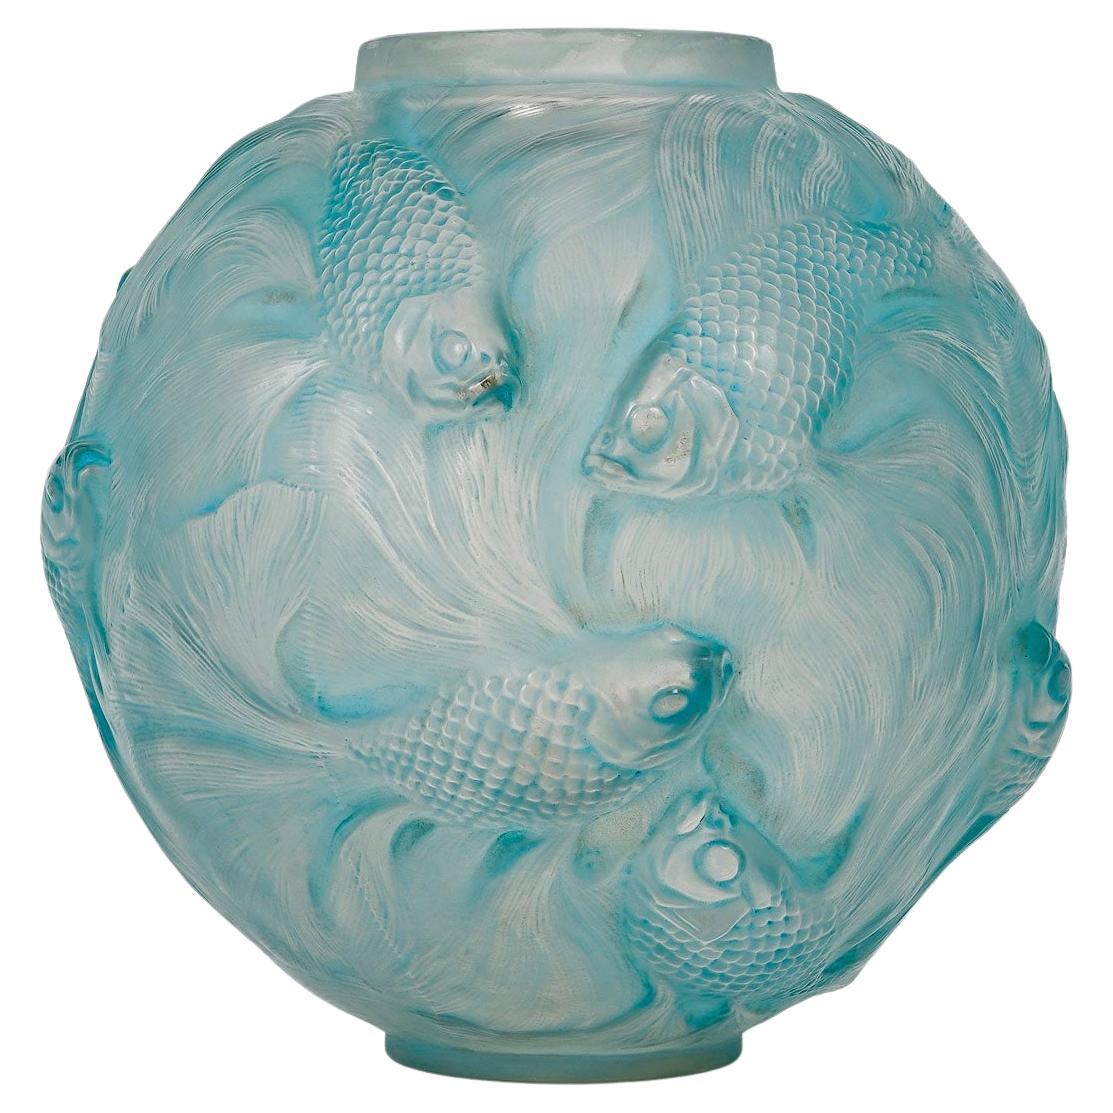 1924 René Lalique Vase Formose Frosted Glass Blue Patina, Fishes For Sale